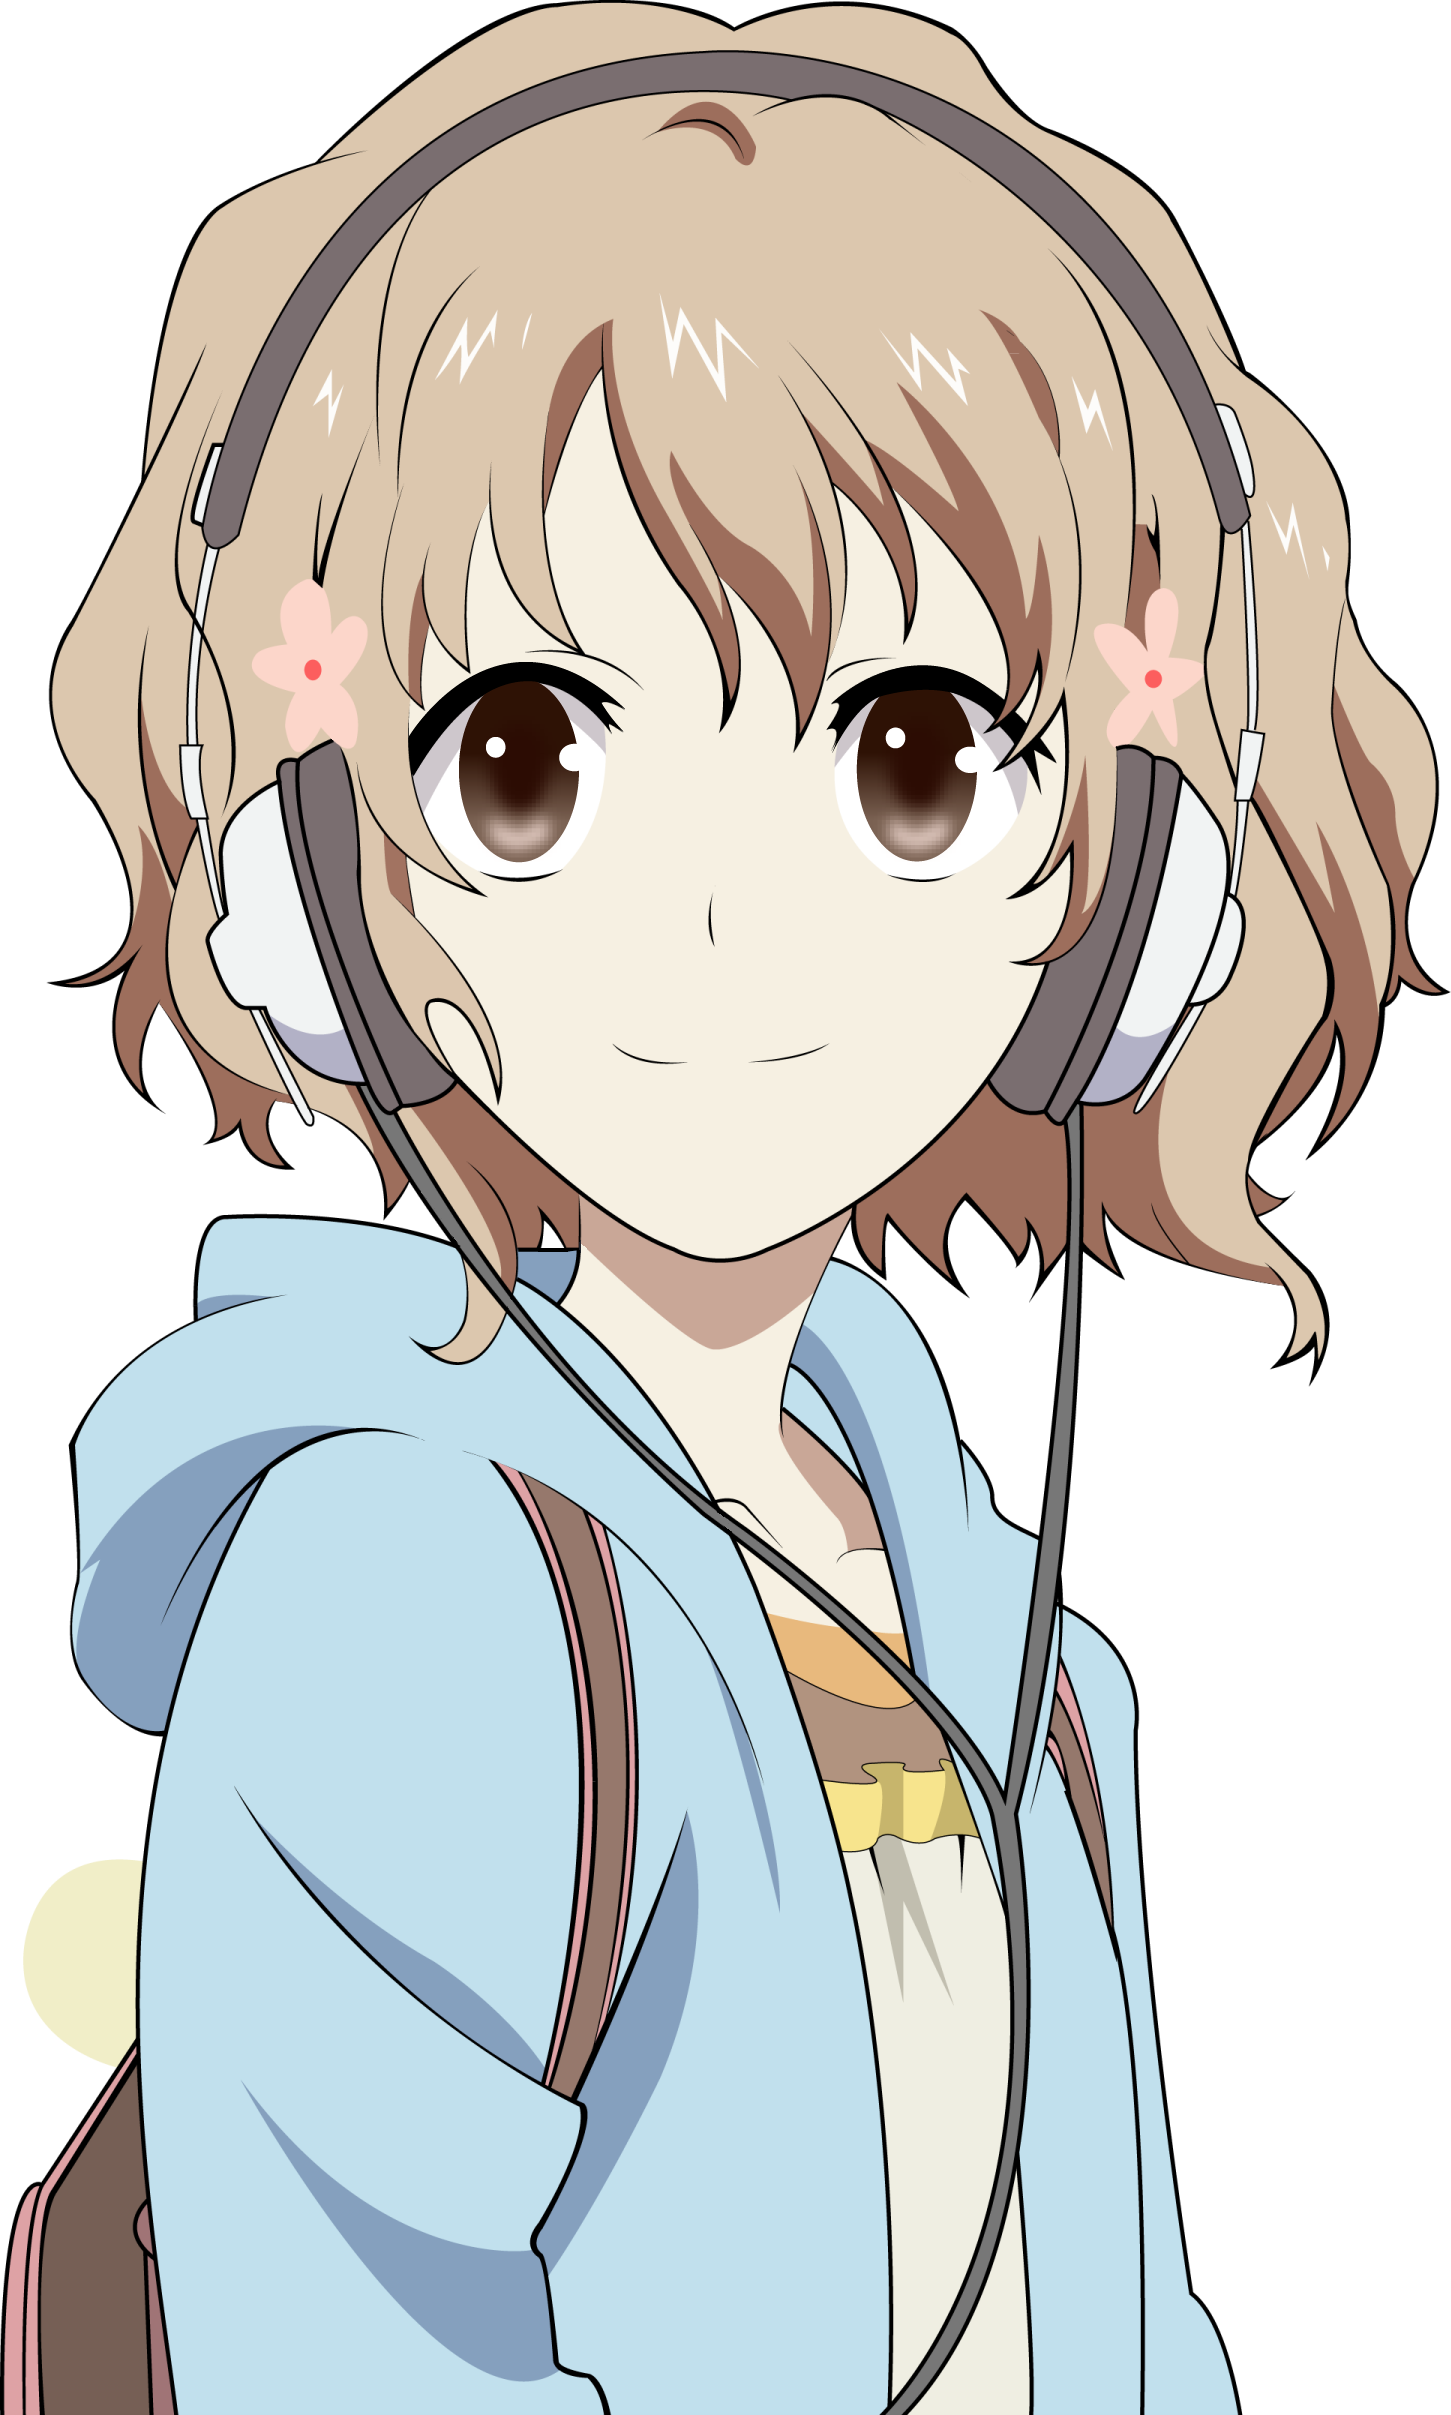 short hair png Girl With Short Blonde Hair And Brown Eyes, Curly Hair Anime Girl